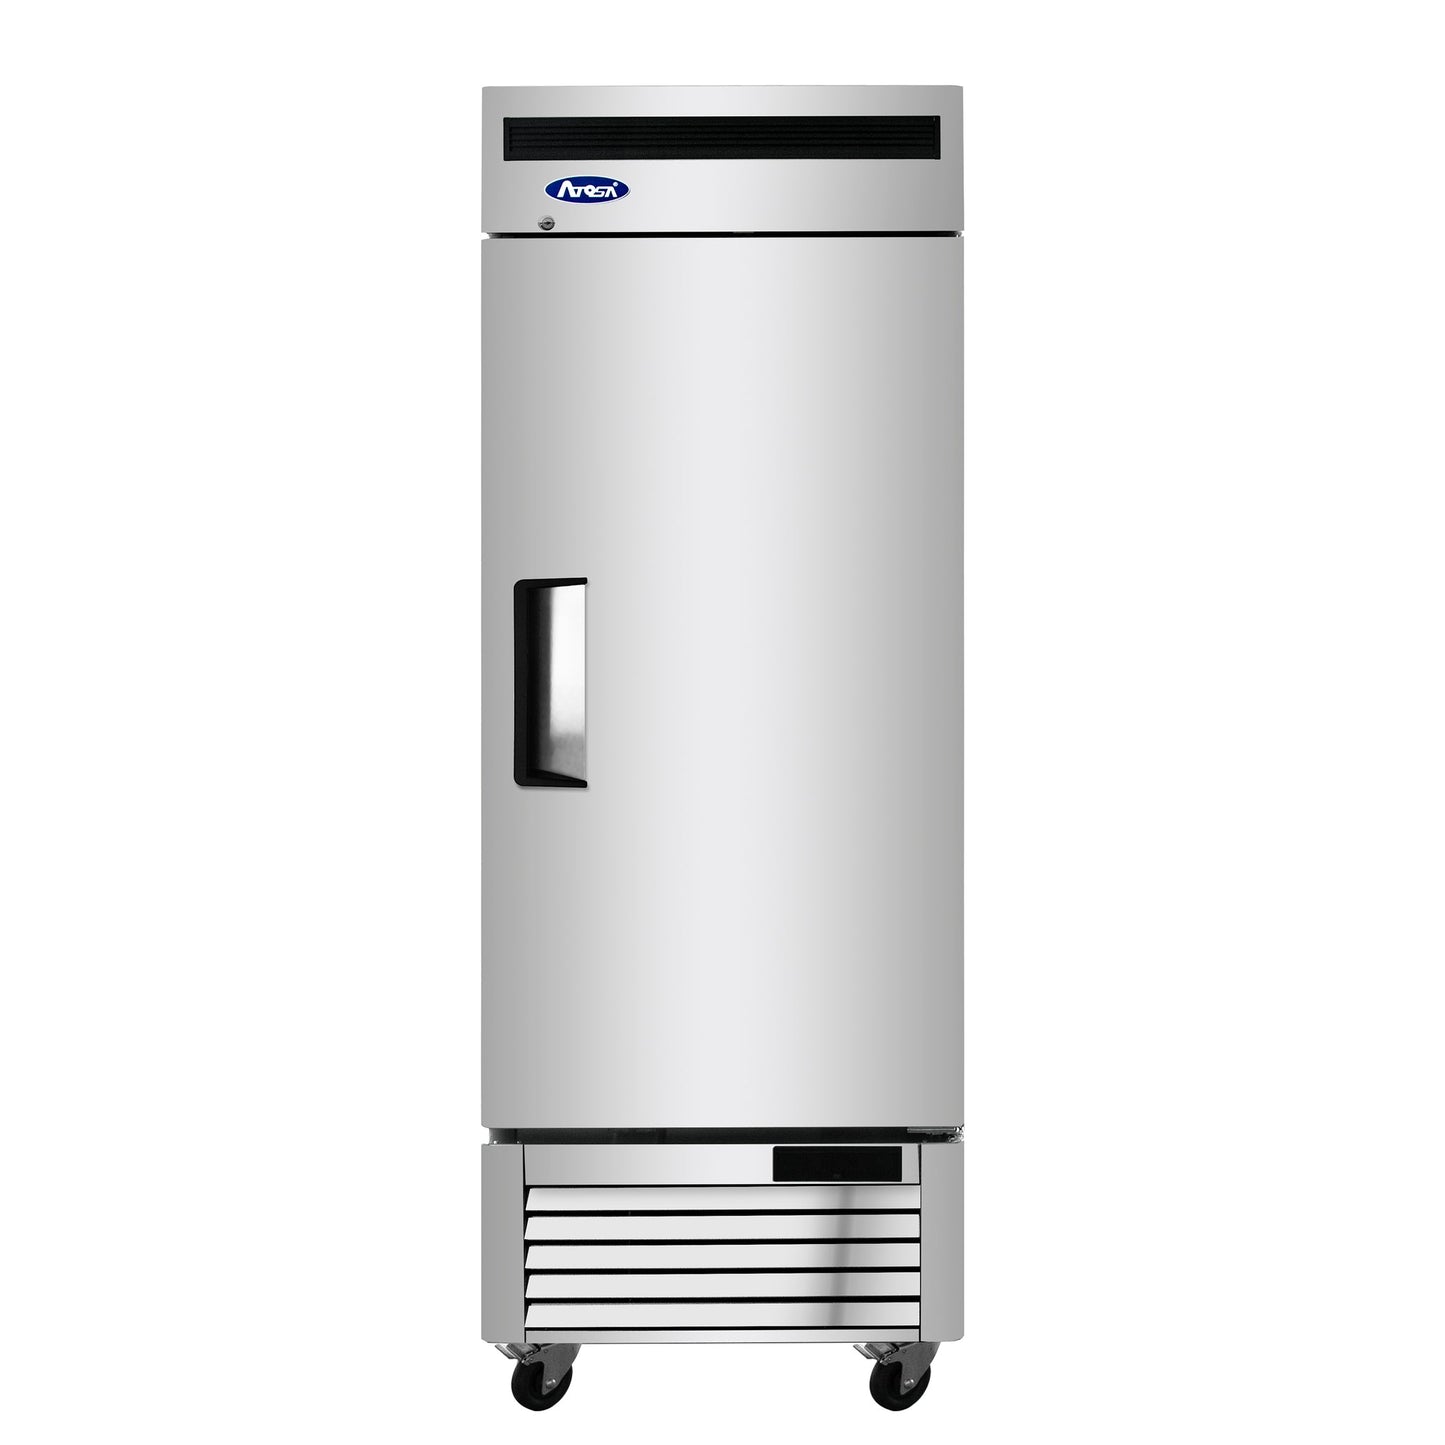 Atosa One-section Reach-in Refrigerator, 27"W x 31-7/10"D x 83-1/10"H, (MBF8505GR)